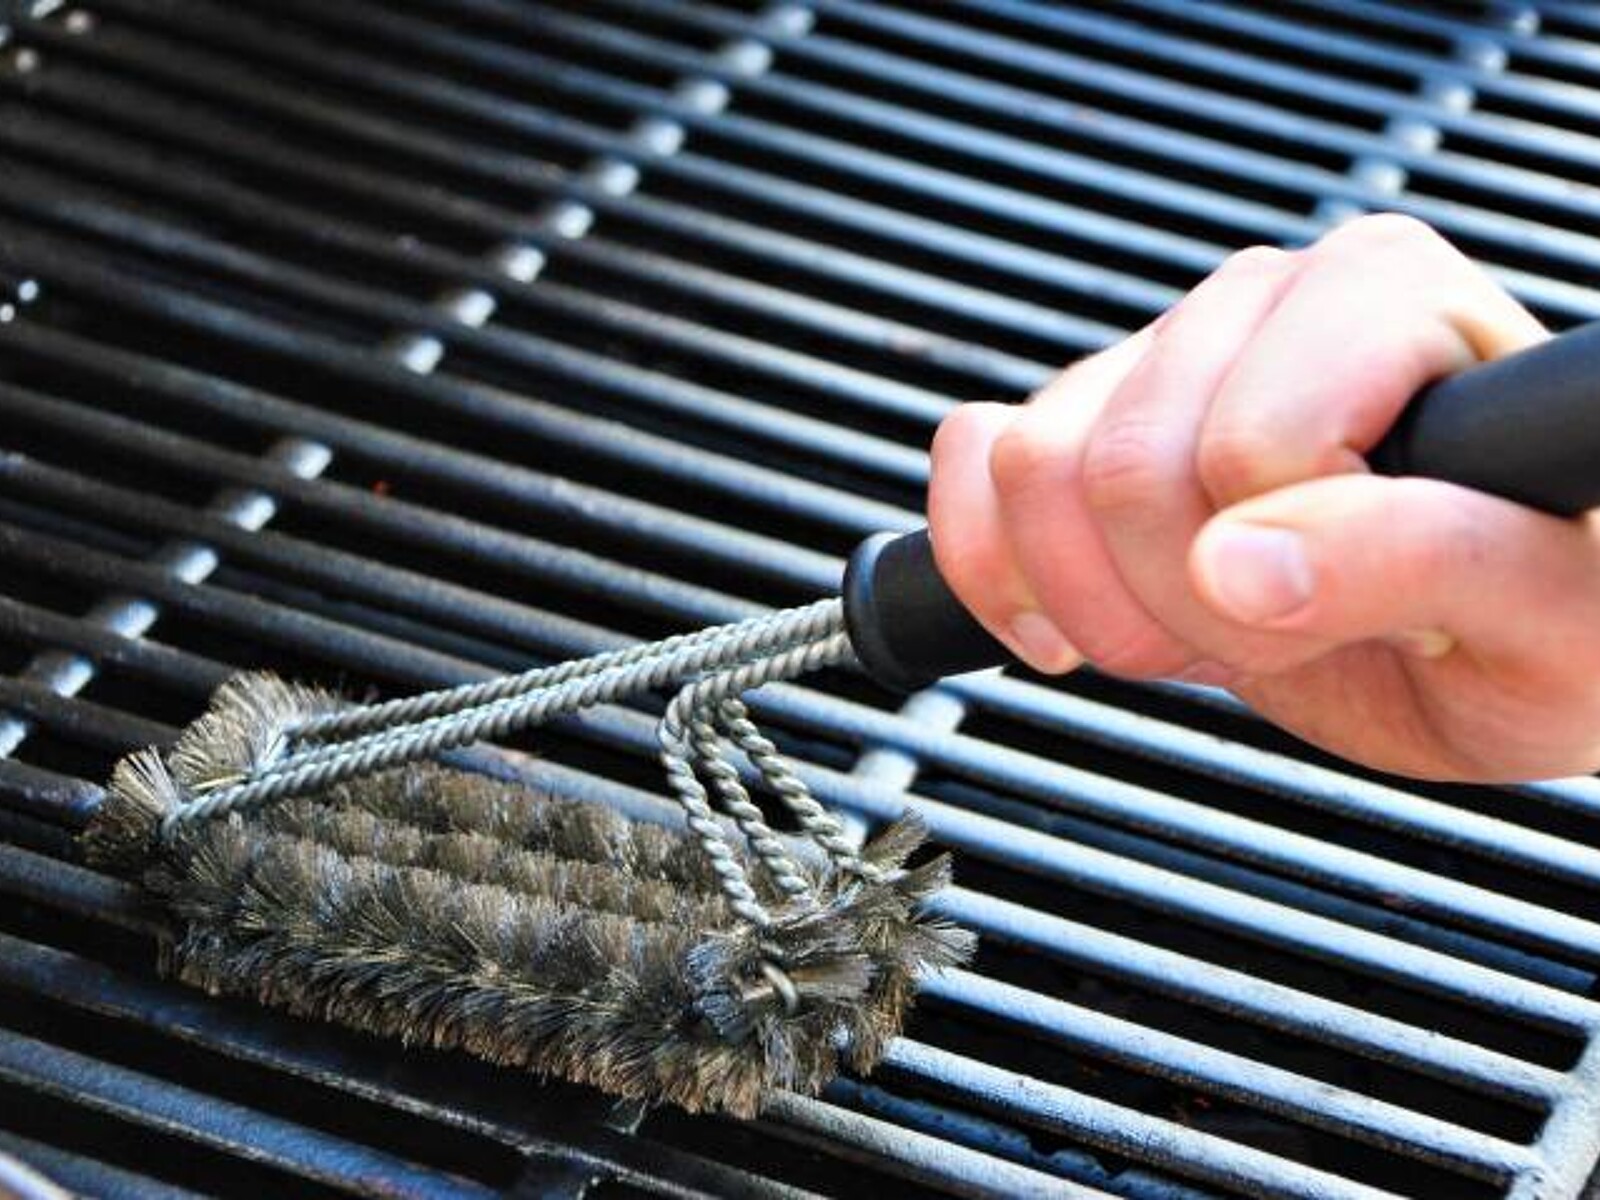 Barbecue Grill Outdoor Steam Cleaning Oil Brushes BBQ Cleaner Suitable For  Charcoal Scraper Gas Accessories Cooking Kitchen Tool